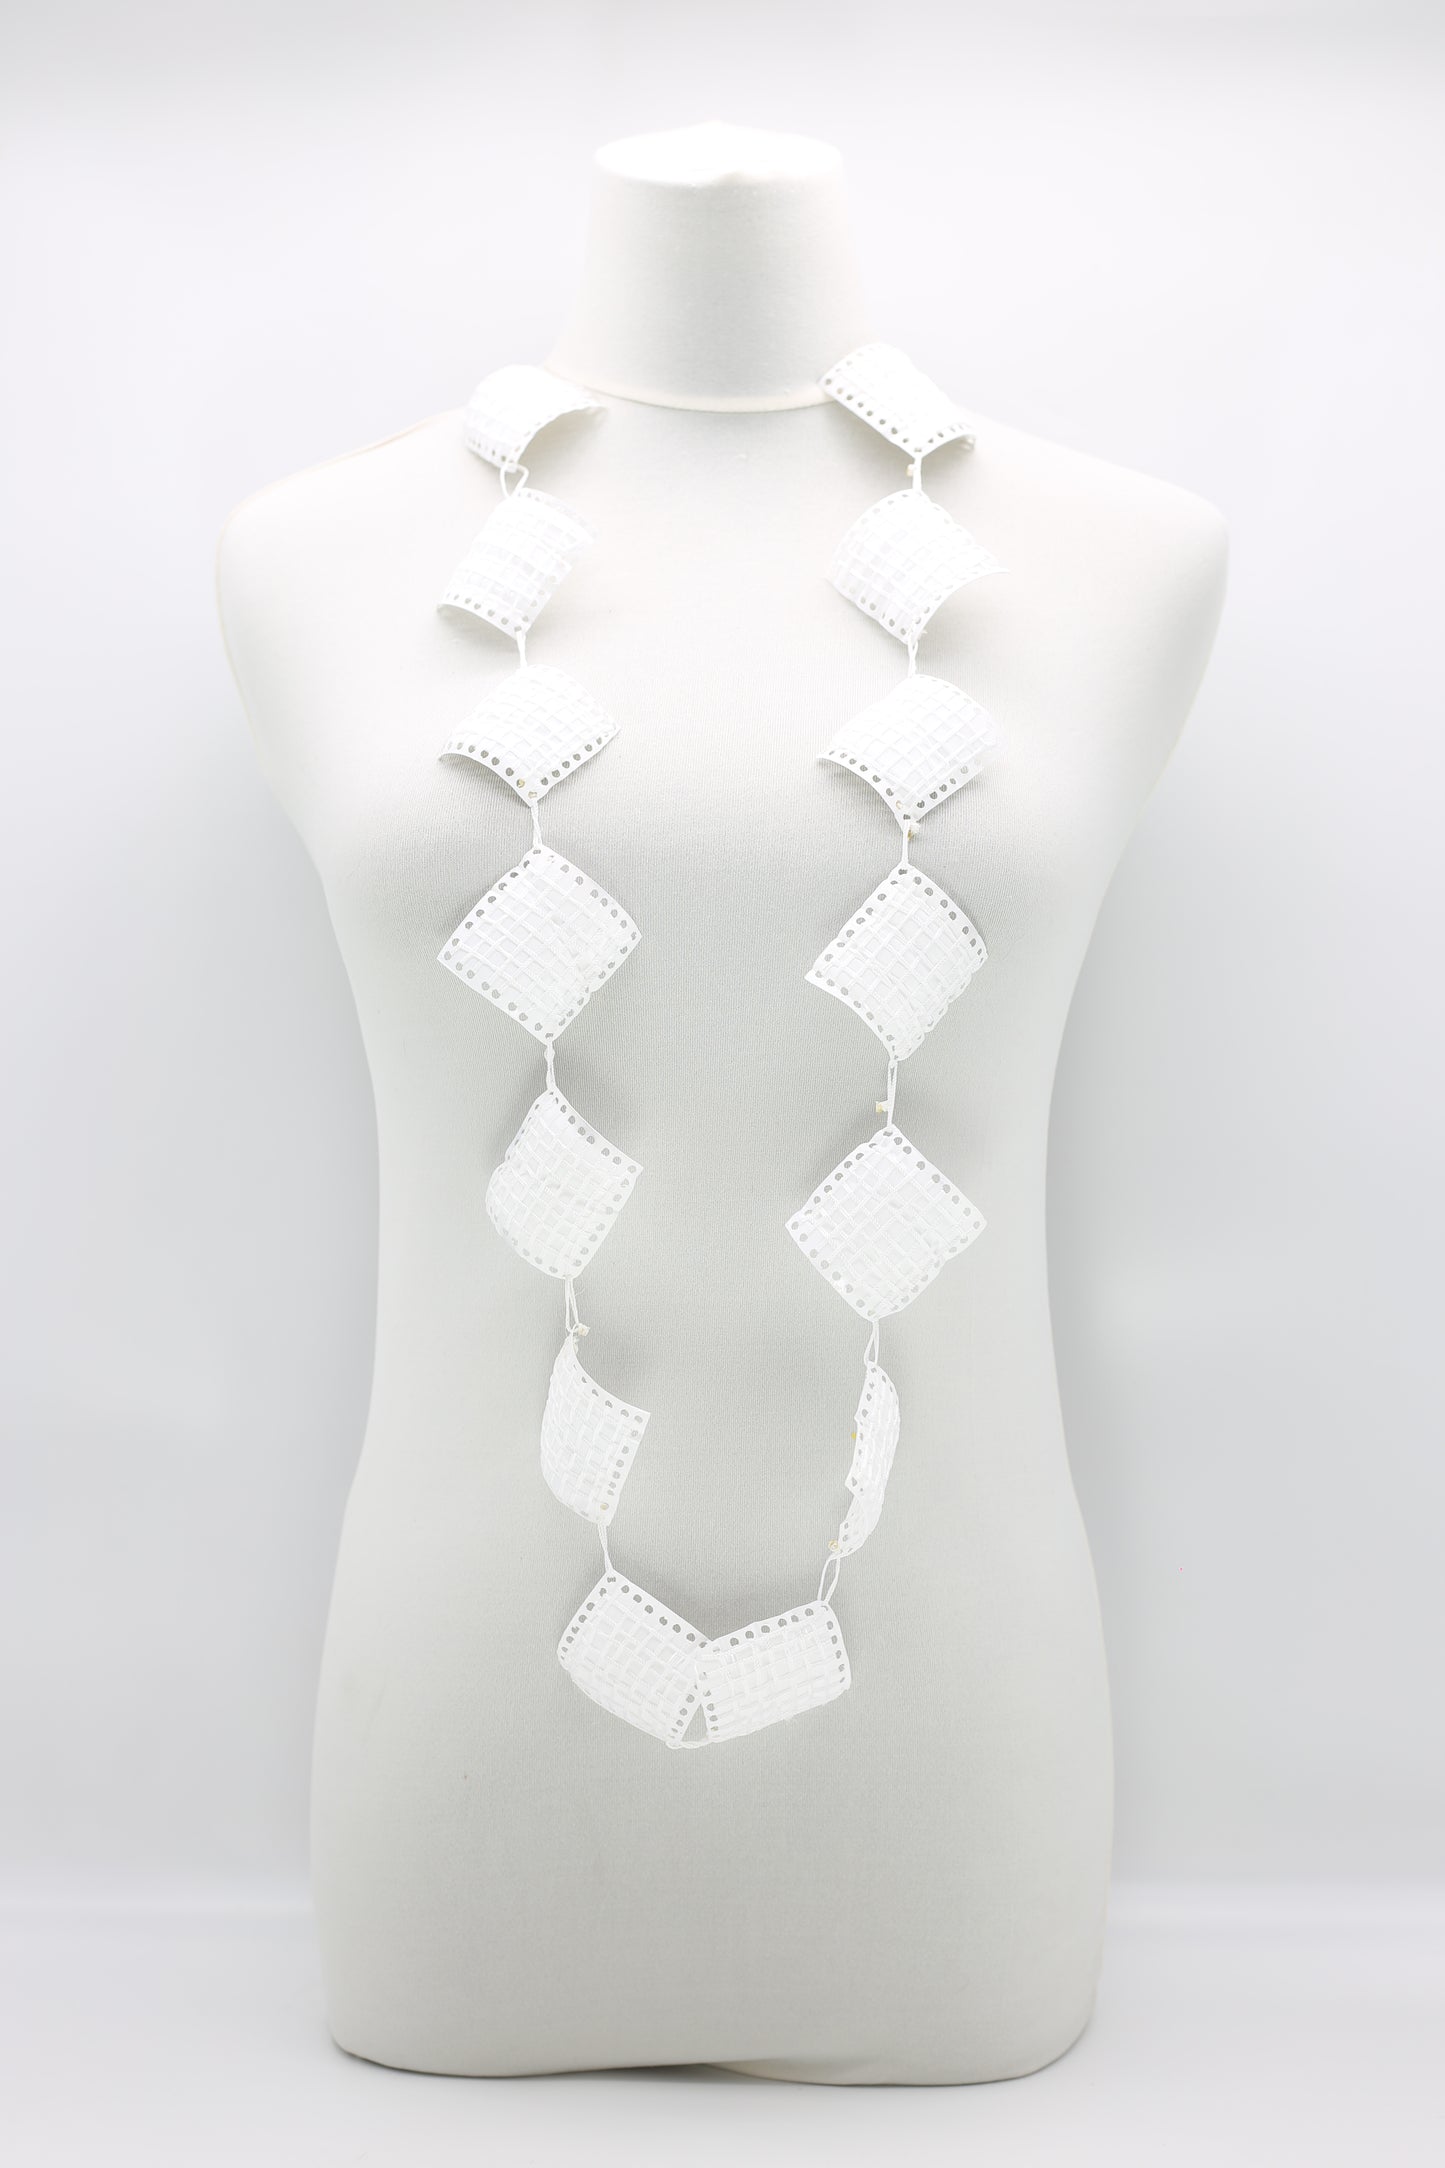 Jianhui Woven Recycled Plastic Necklace - White